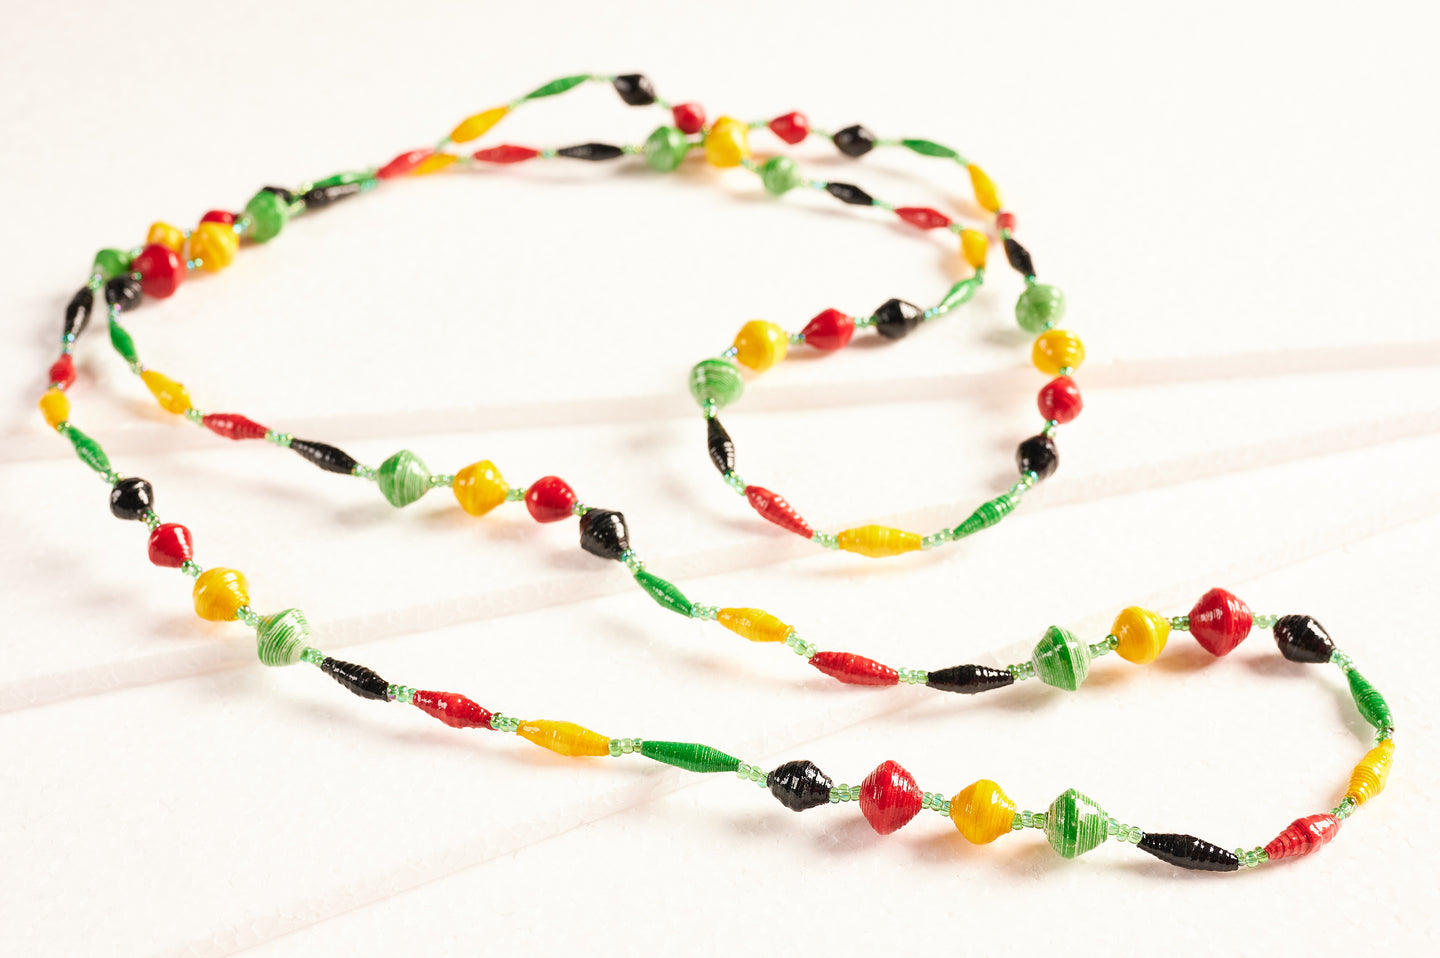 Long reggae necklace made of paper beads